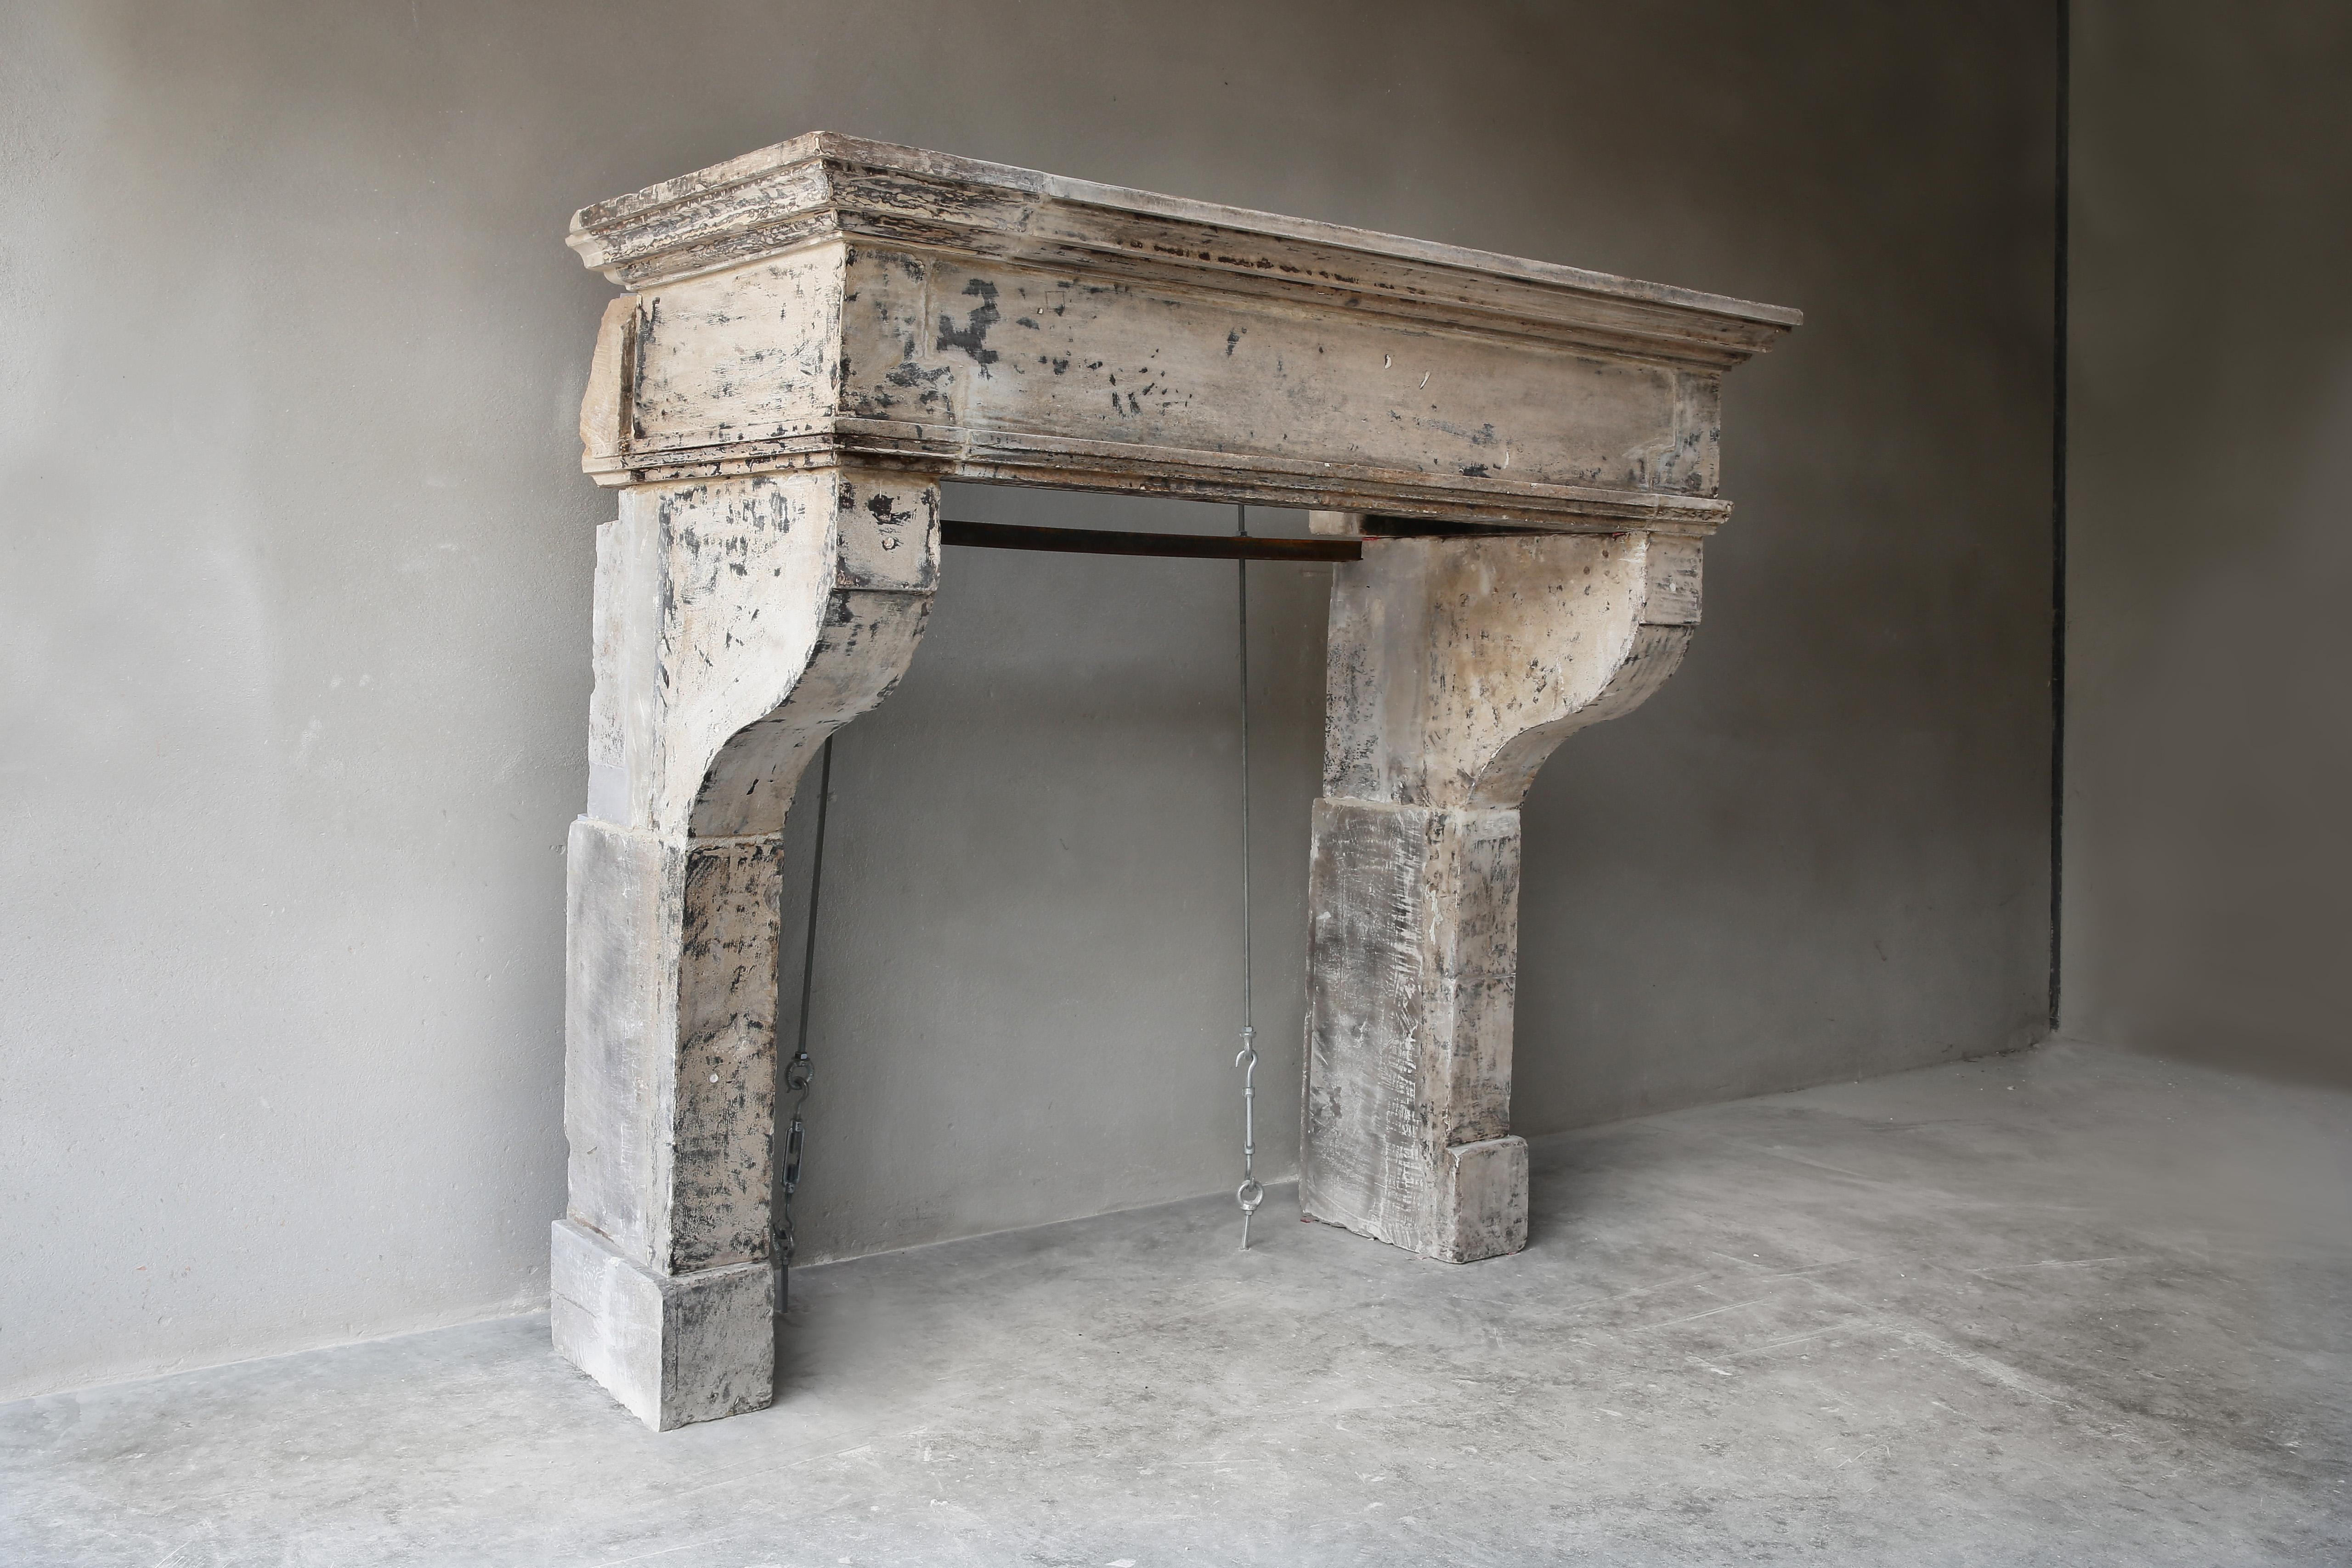 Tough antique chimney from the 19th century of French limestone. This old mantelpiece has a warm color nuance and patine and the moulure (frame) in this fireplace creates an authentic look. A beautiful fireplace that would fit very well in a country